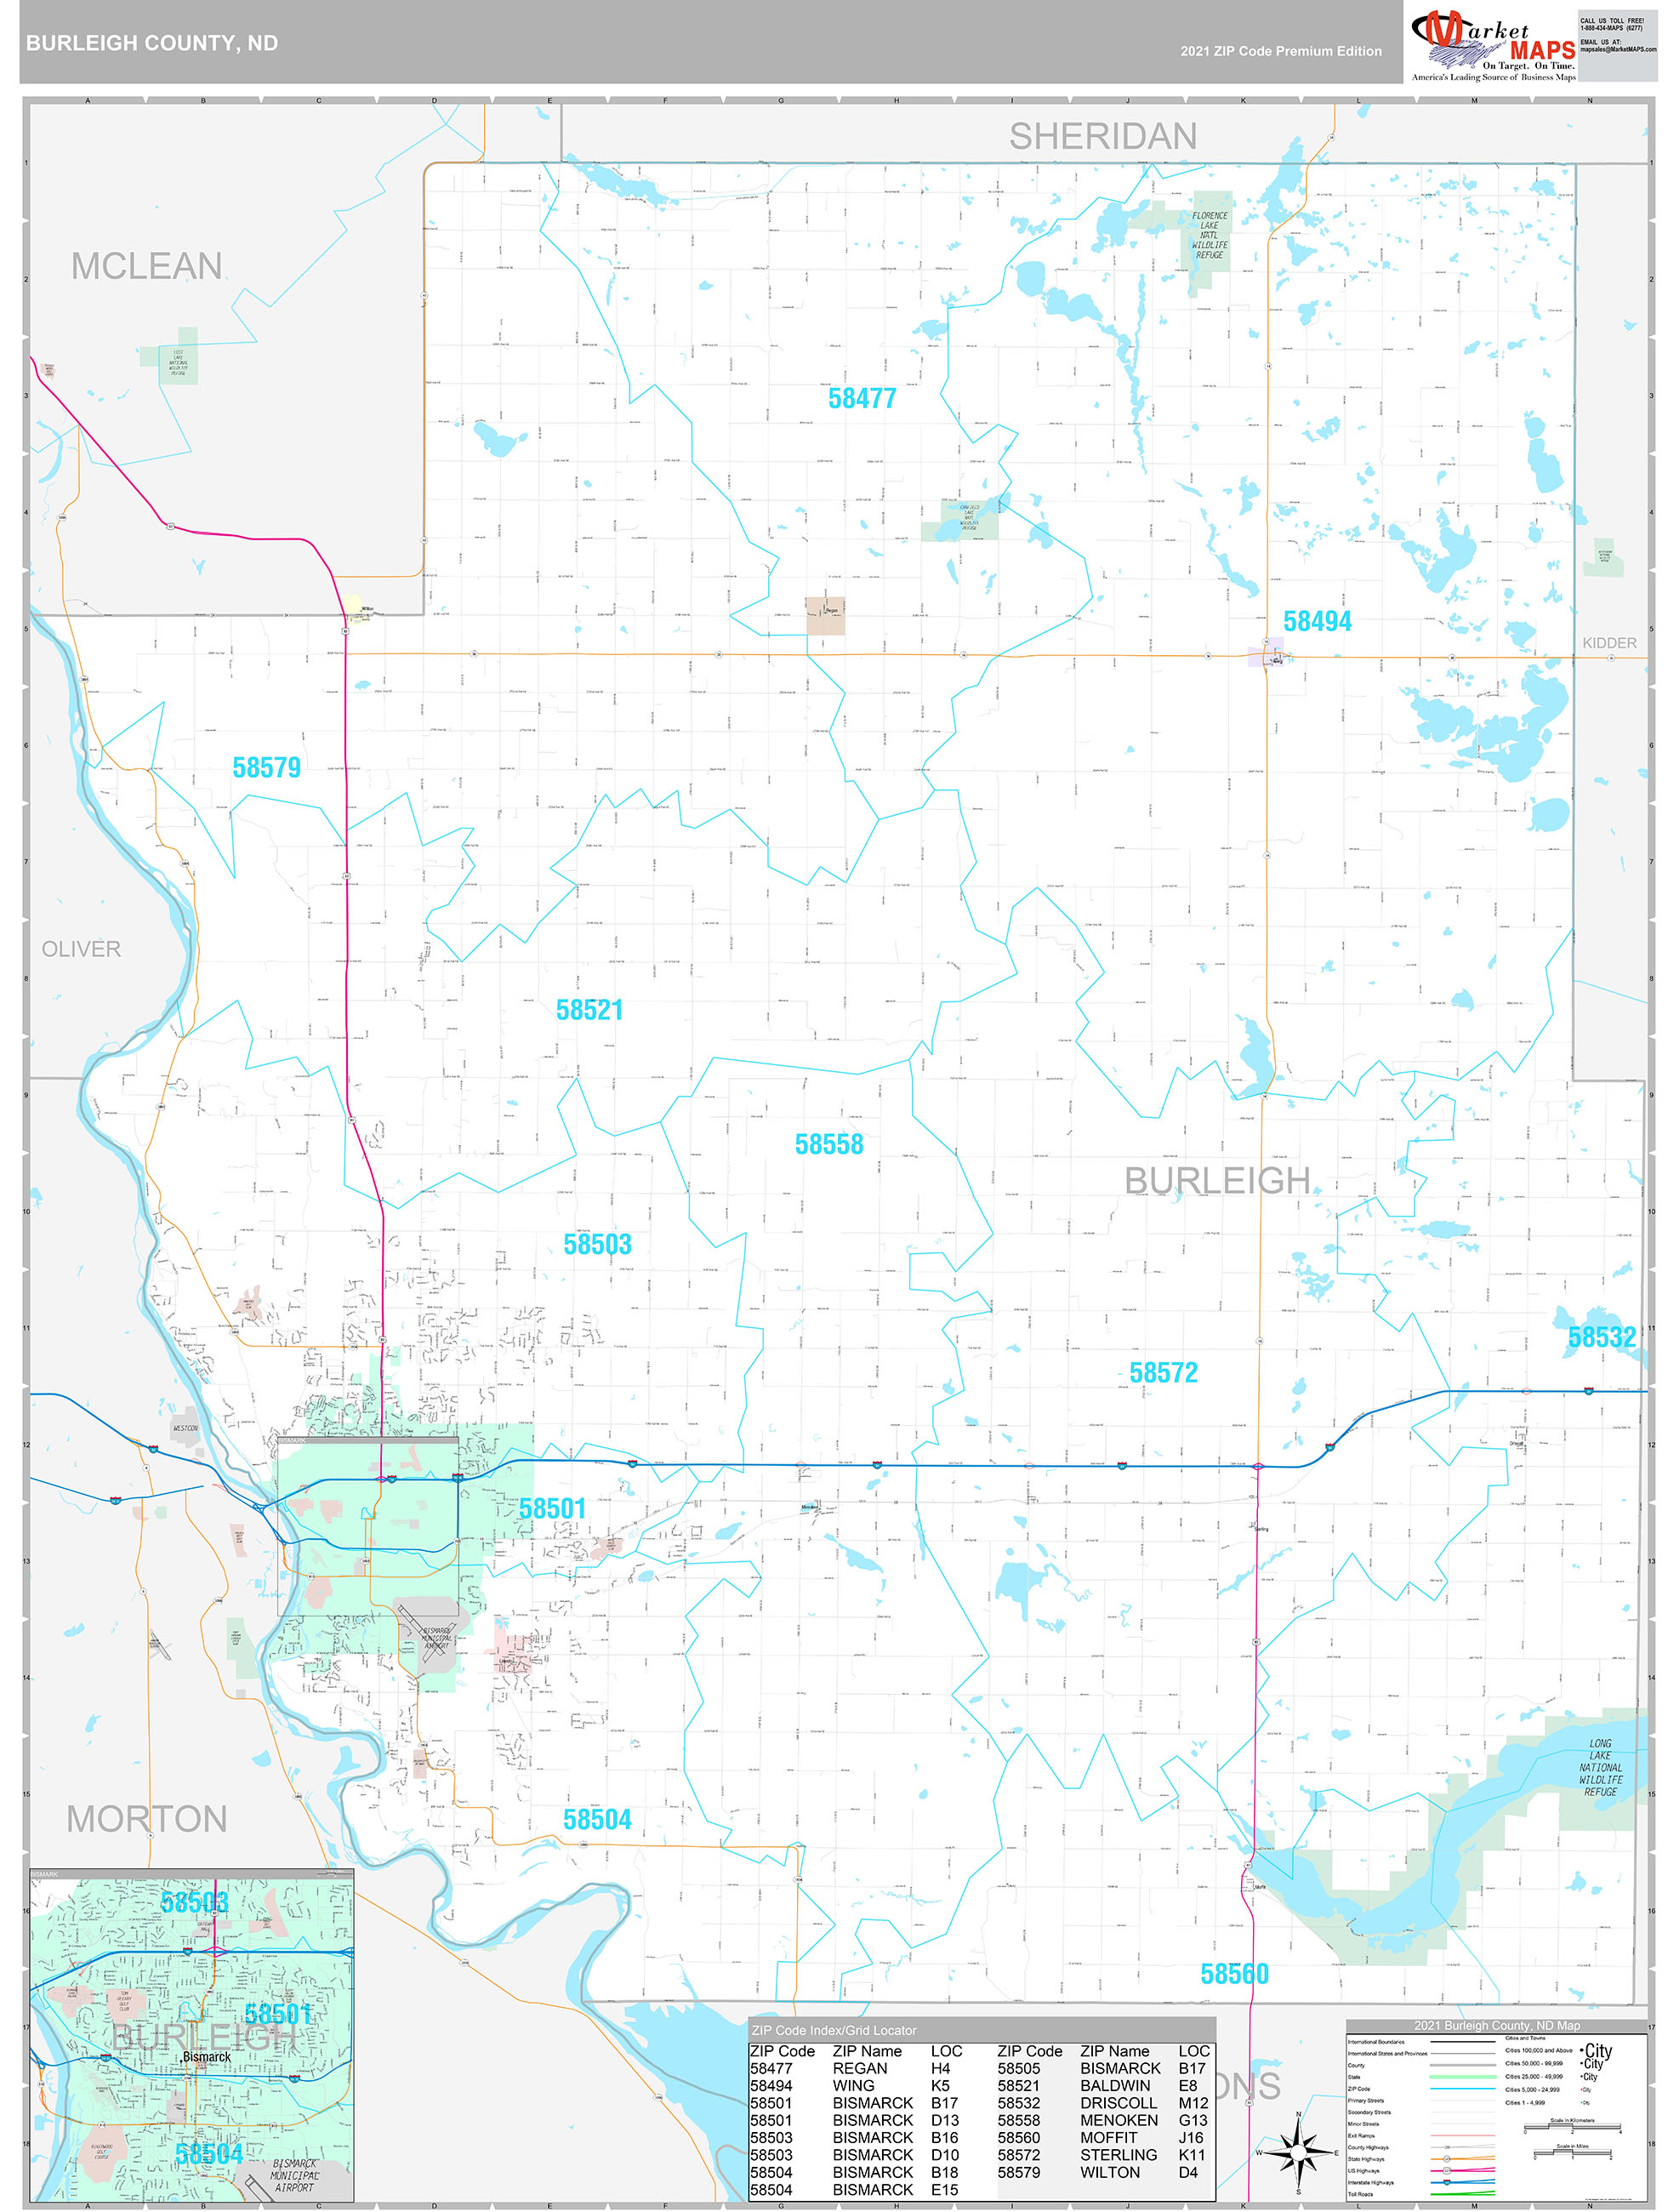 Burleigh County ND Wall Map Premium Style by MarketMAPS MapSales